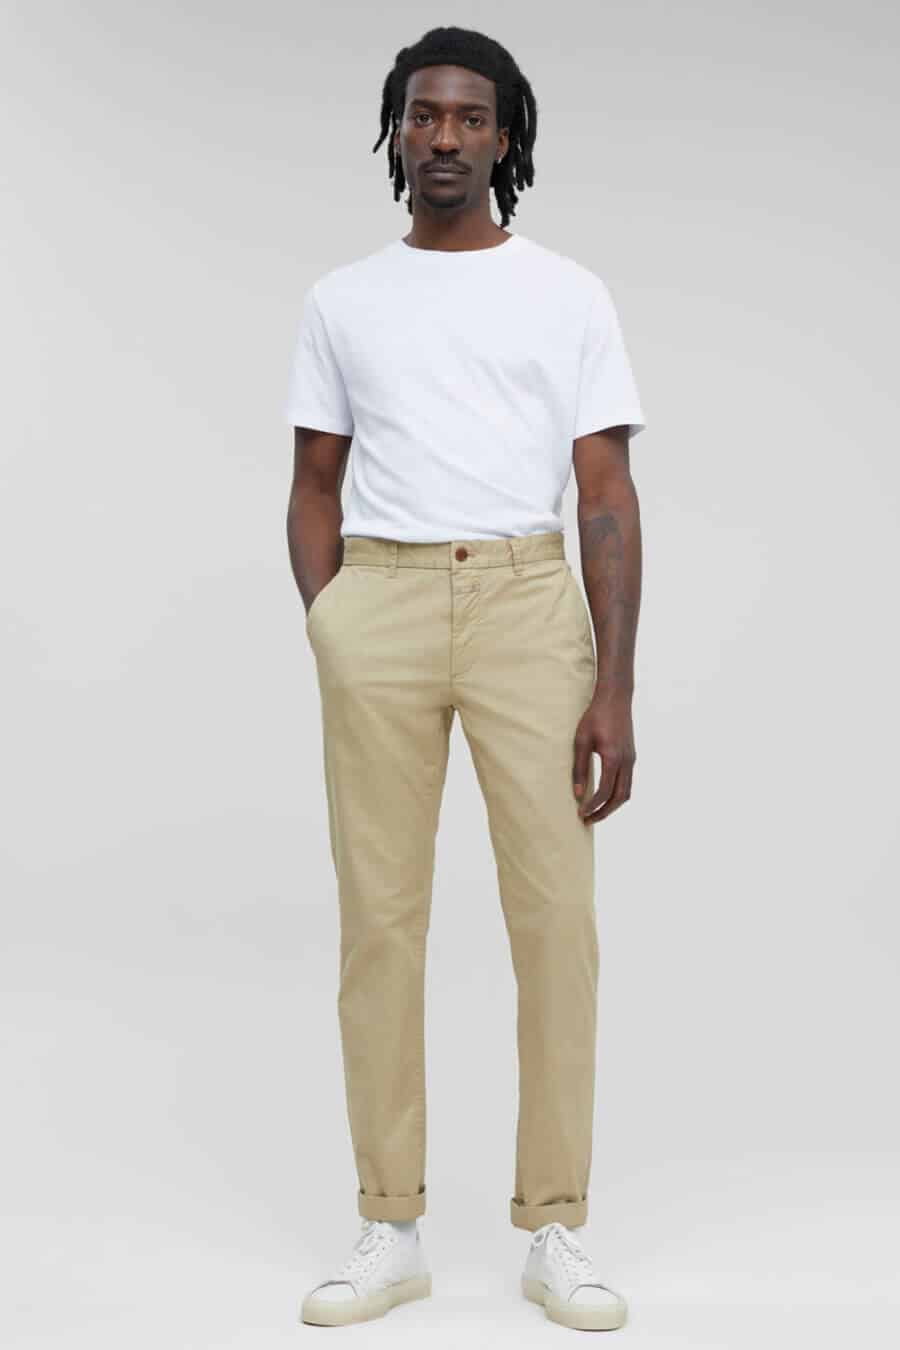 Men's simple khaki pants outfit with a white t-shirt and sneakers